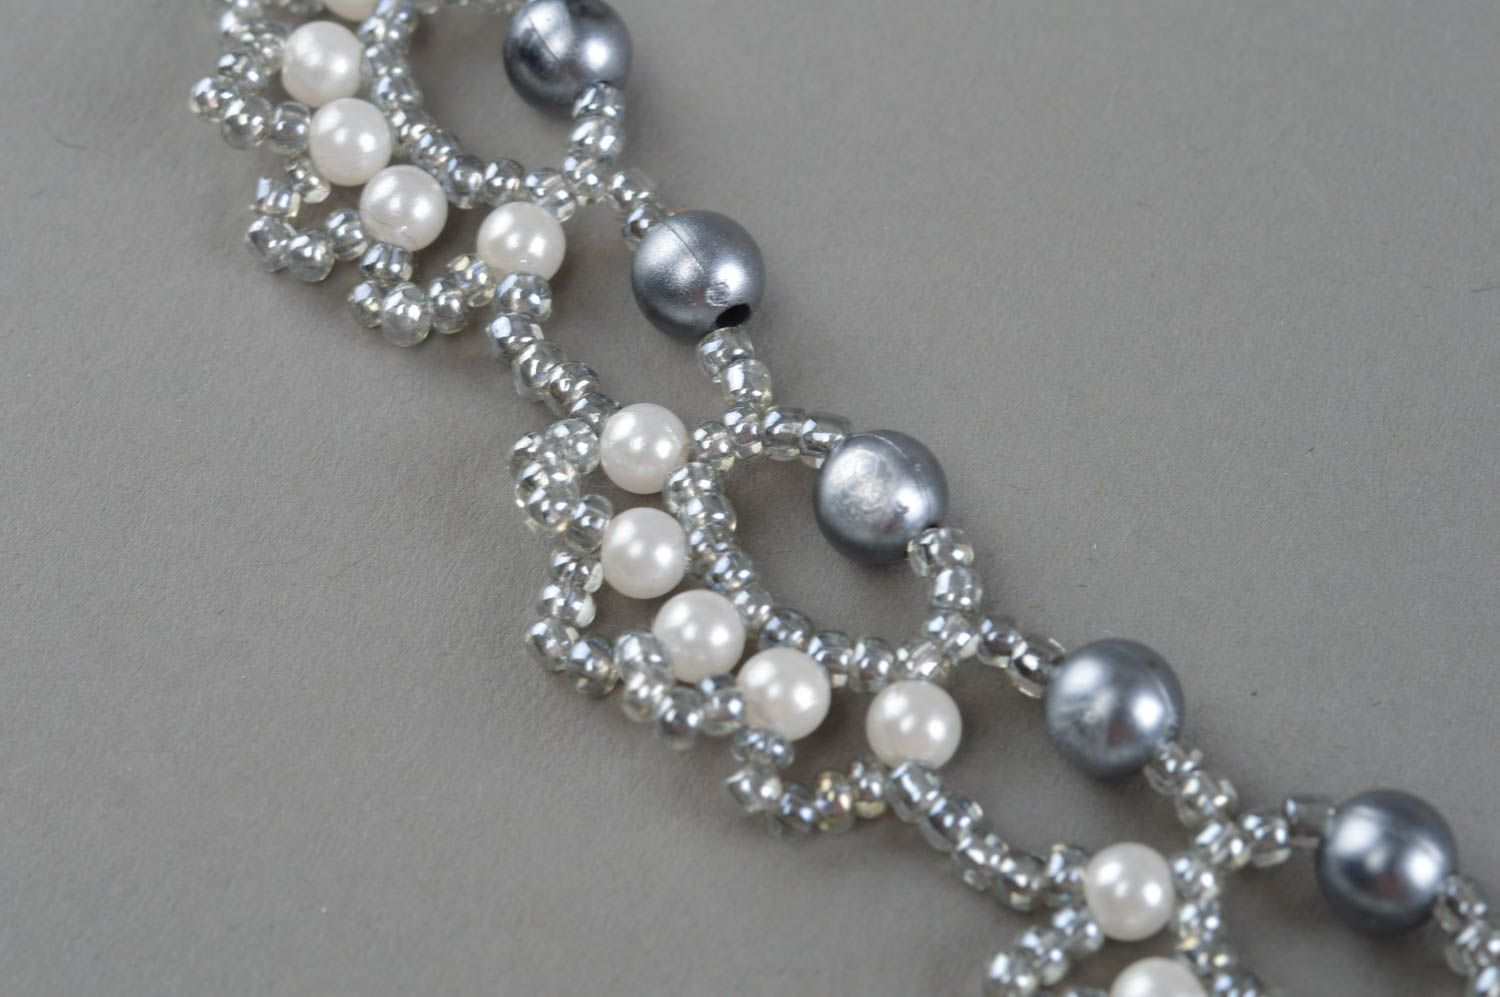 Seed bead necklace handmade woven accessory artificial pearl jewelry for girls photo 3